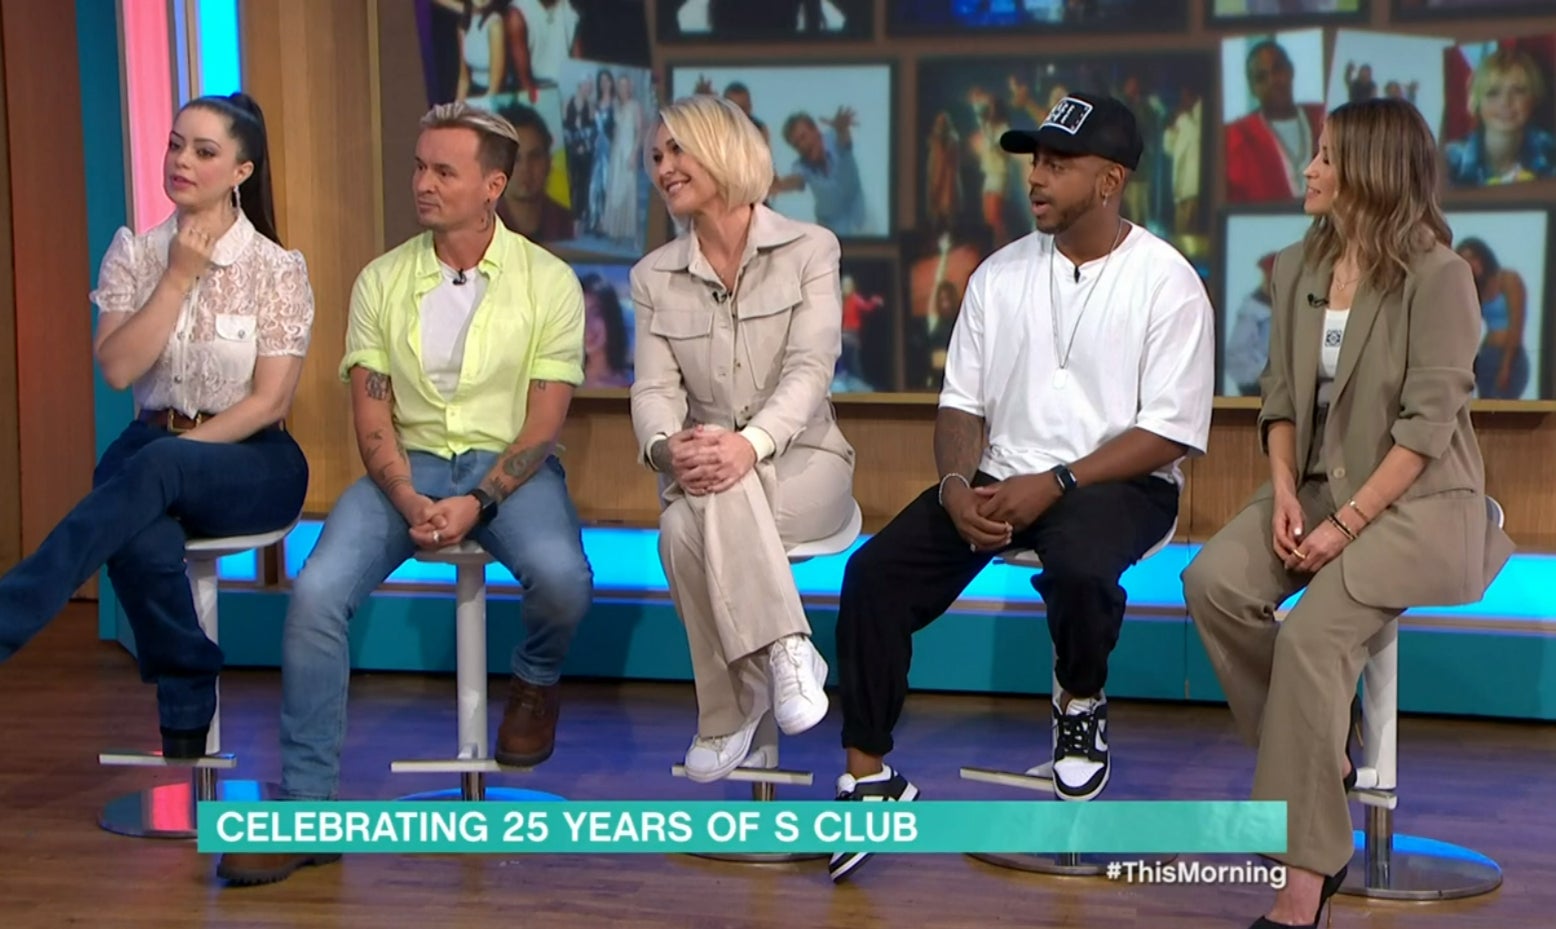 S Club denied the reports on ‘This Morning'